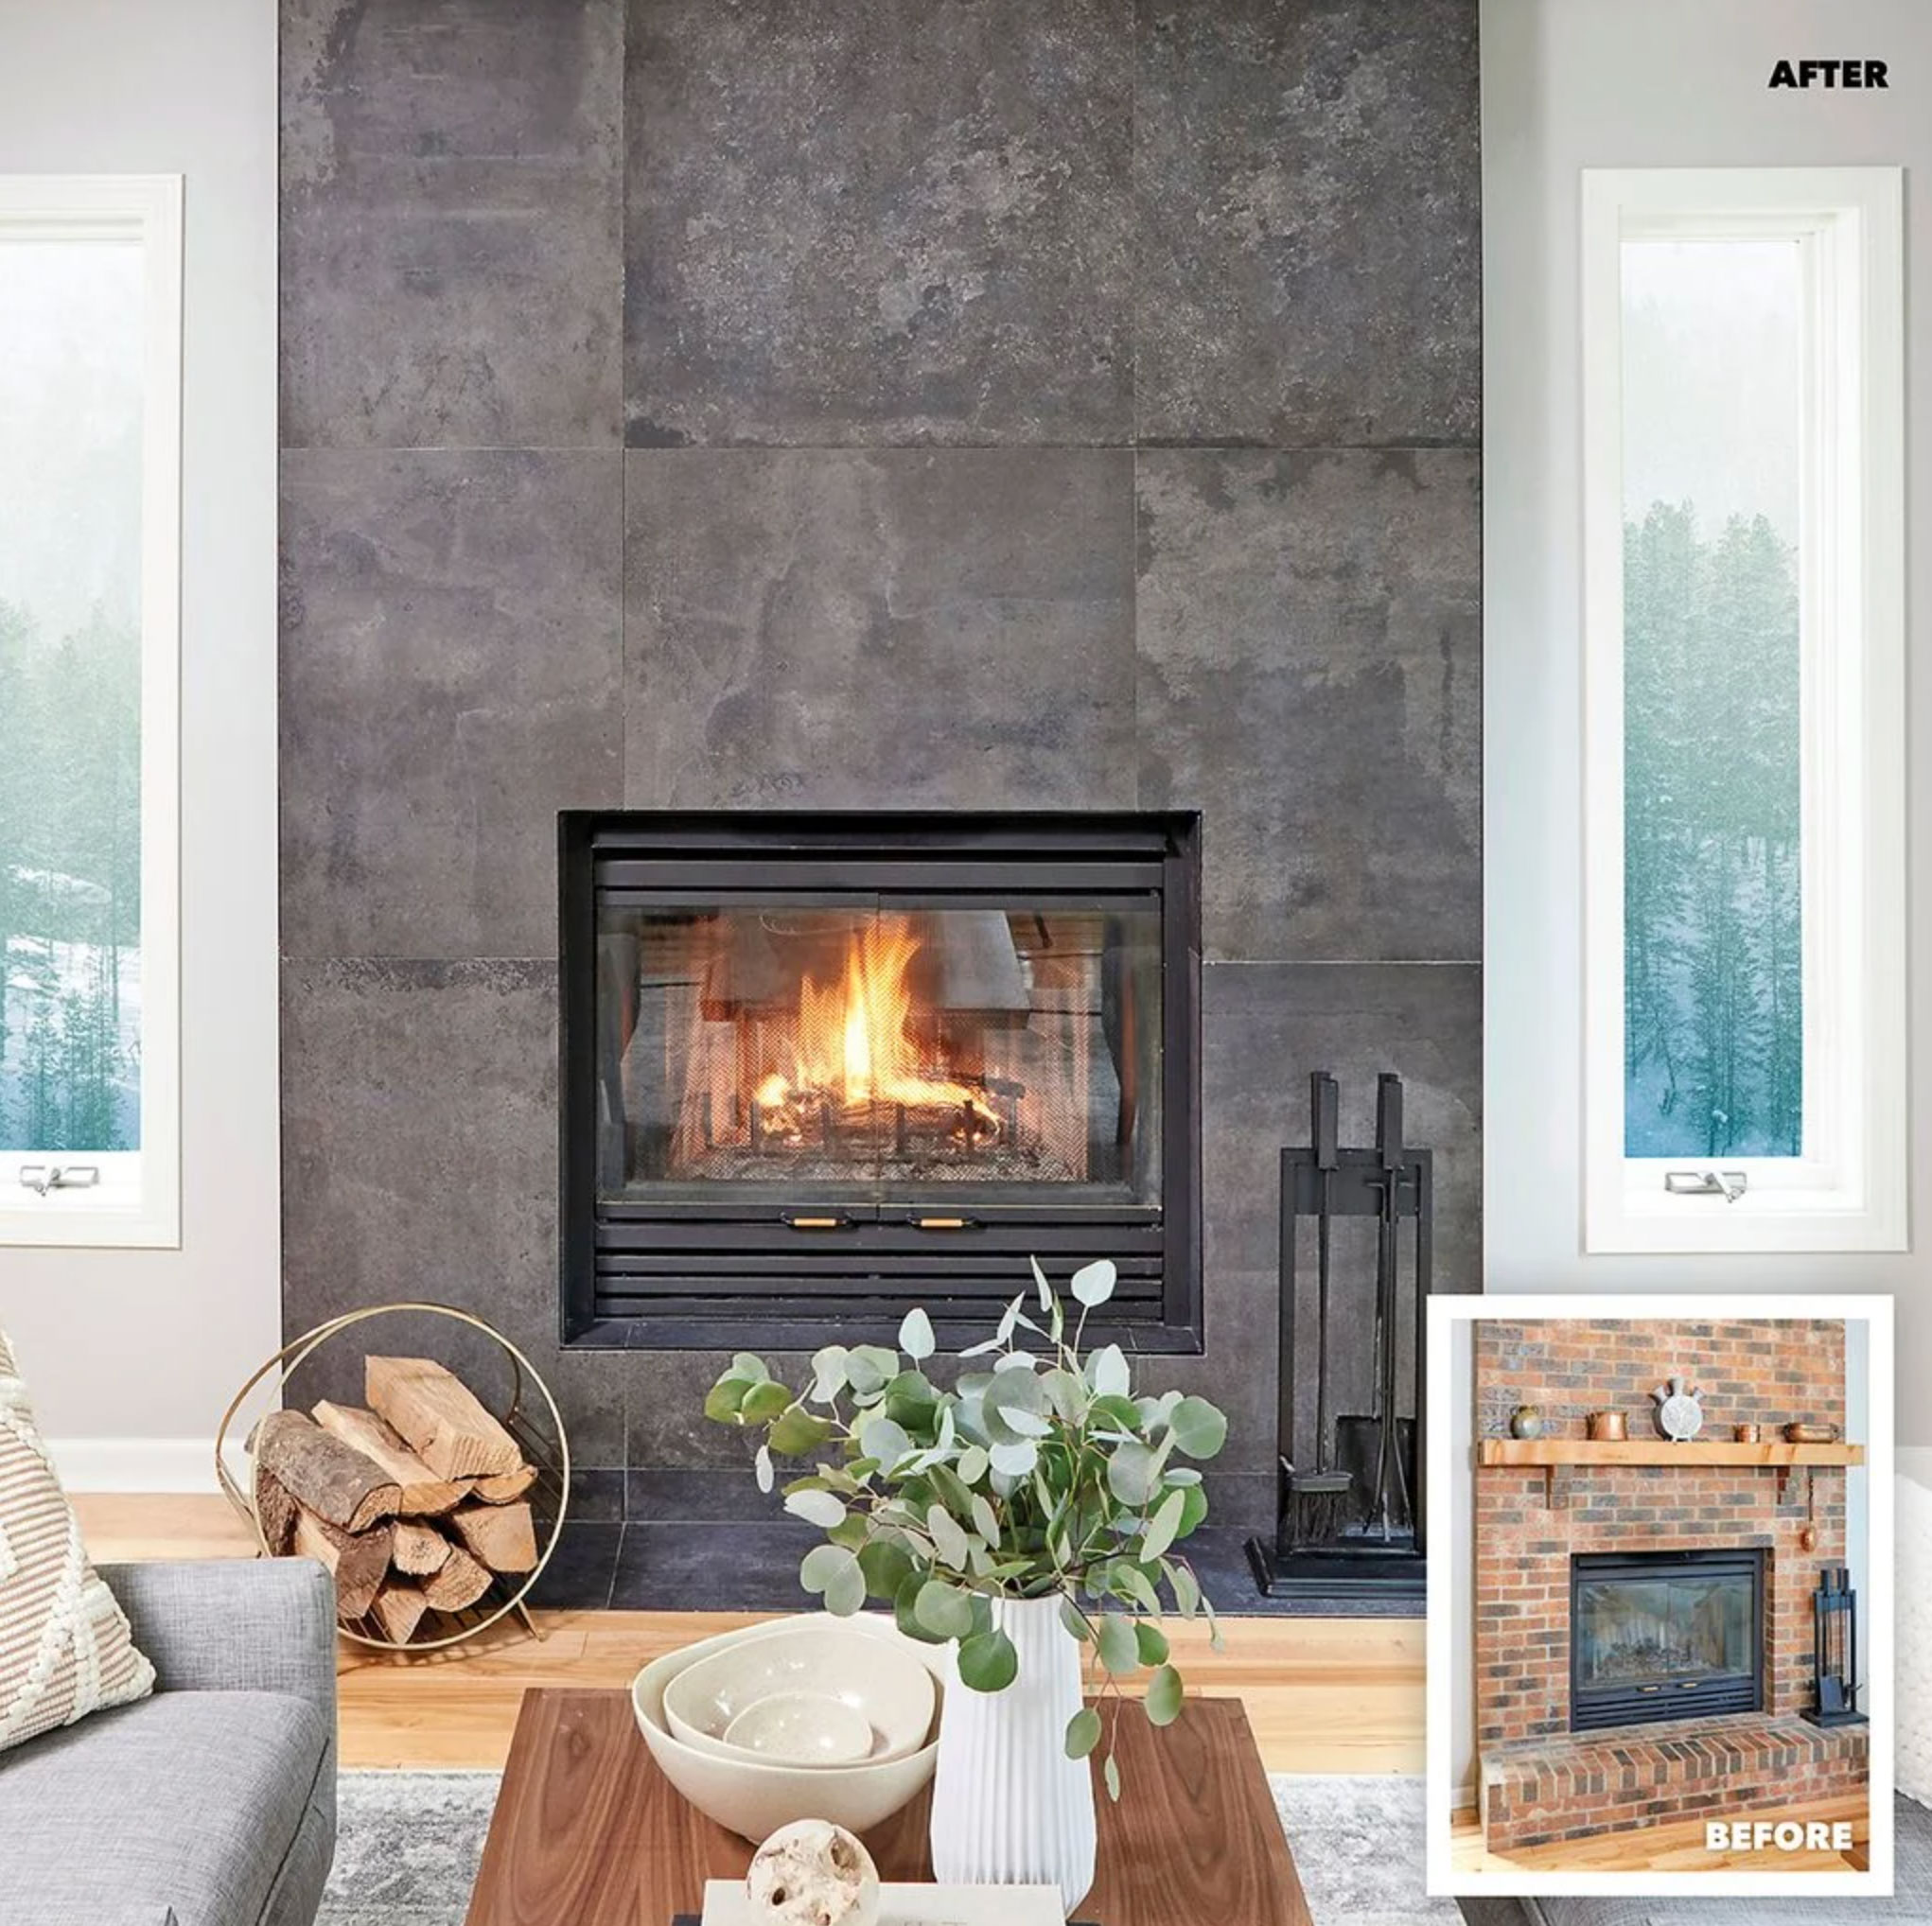 A revamped fireplace